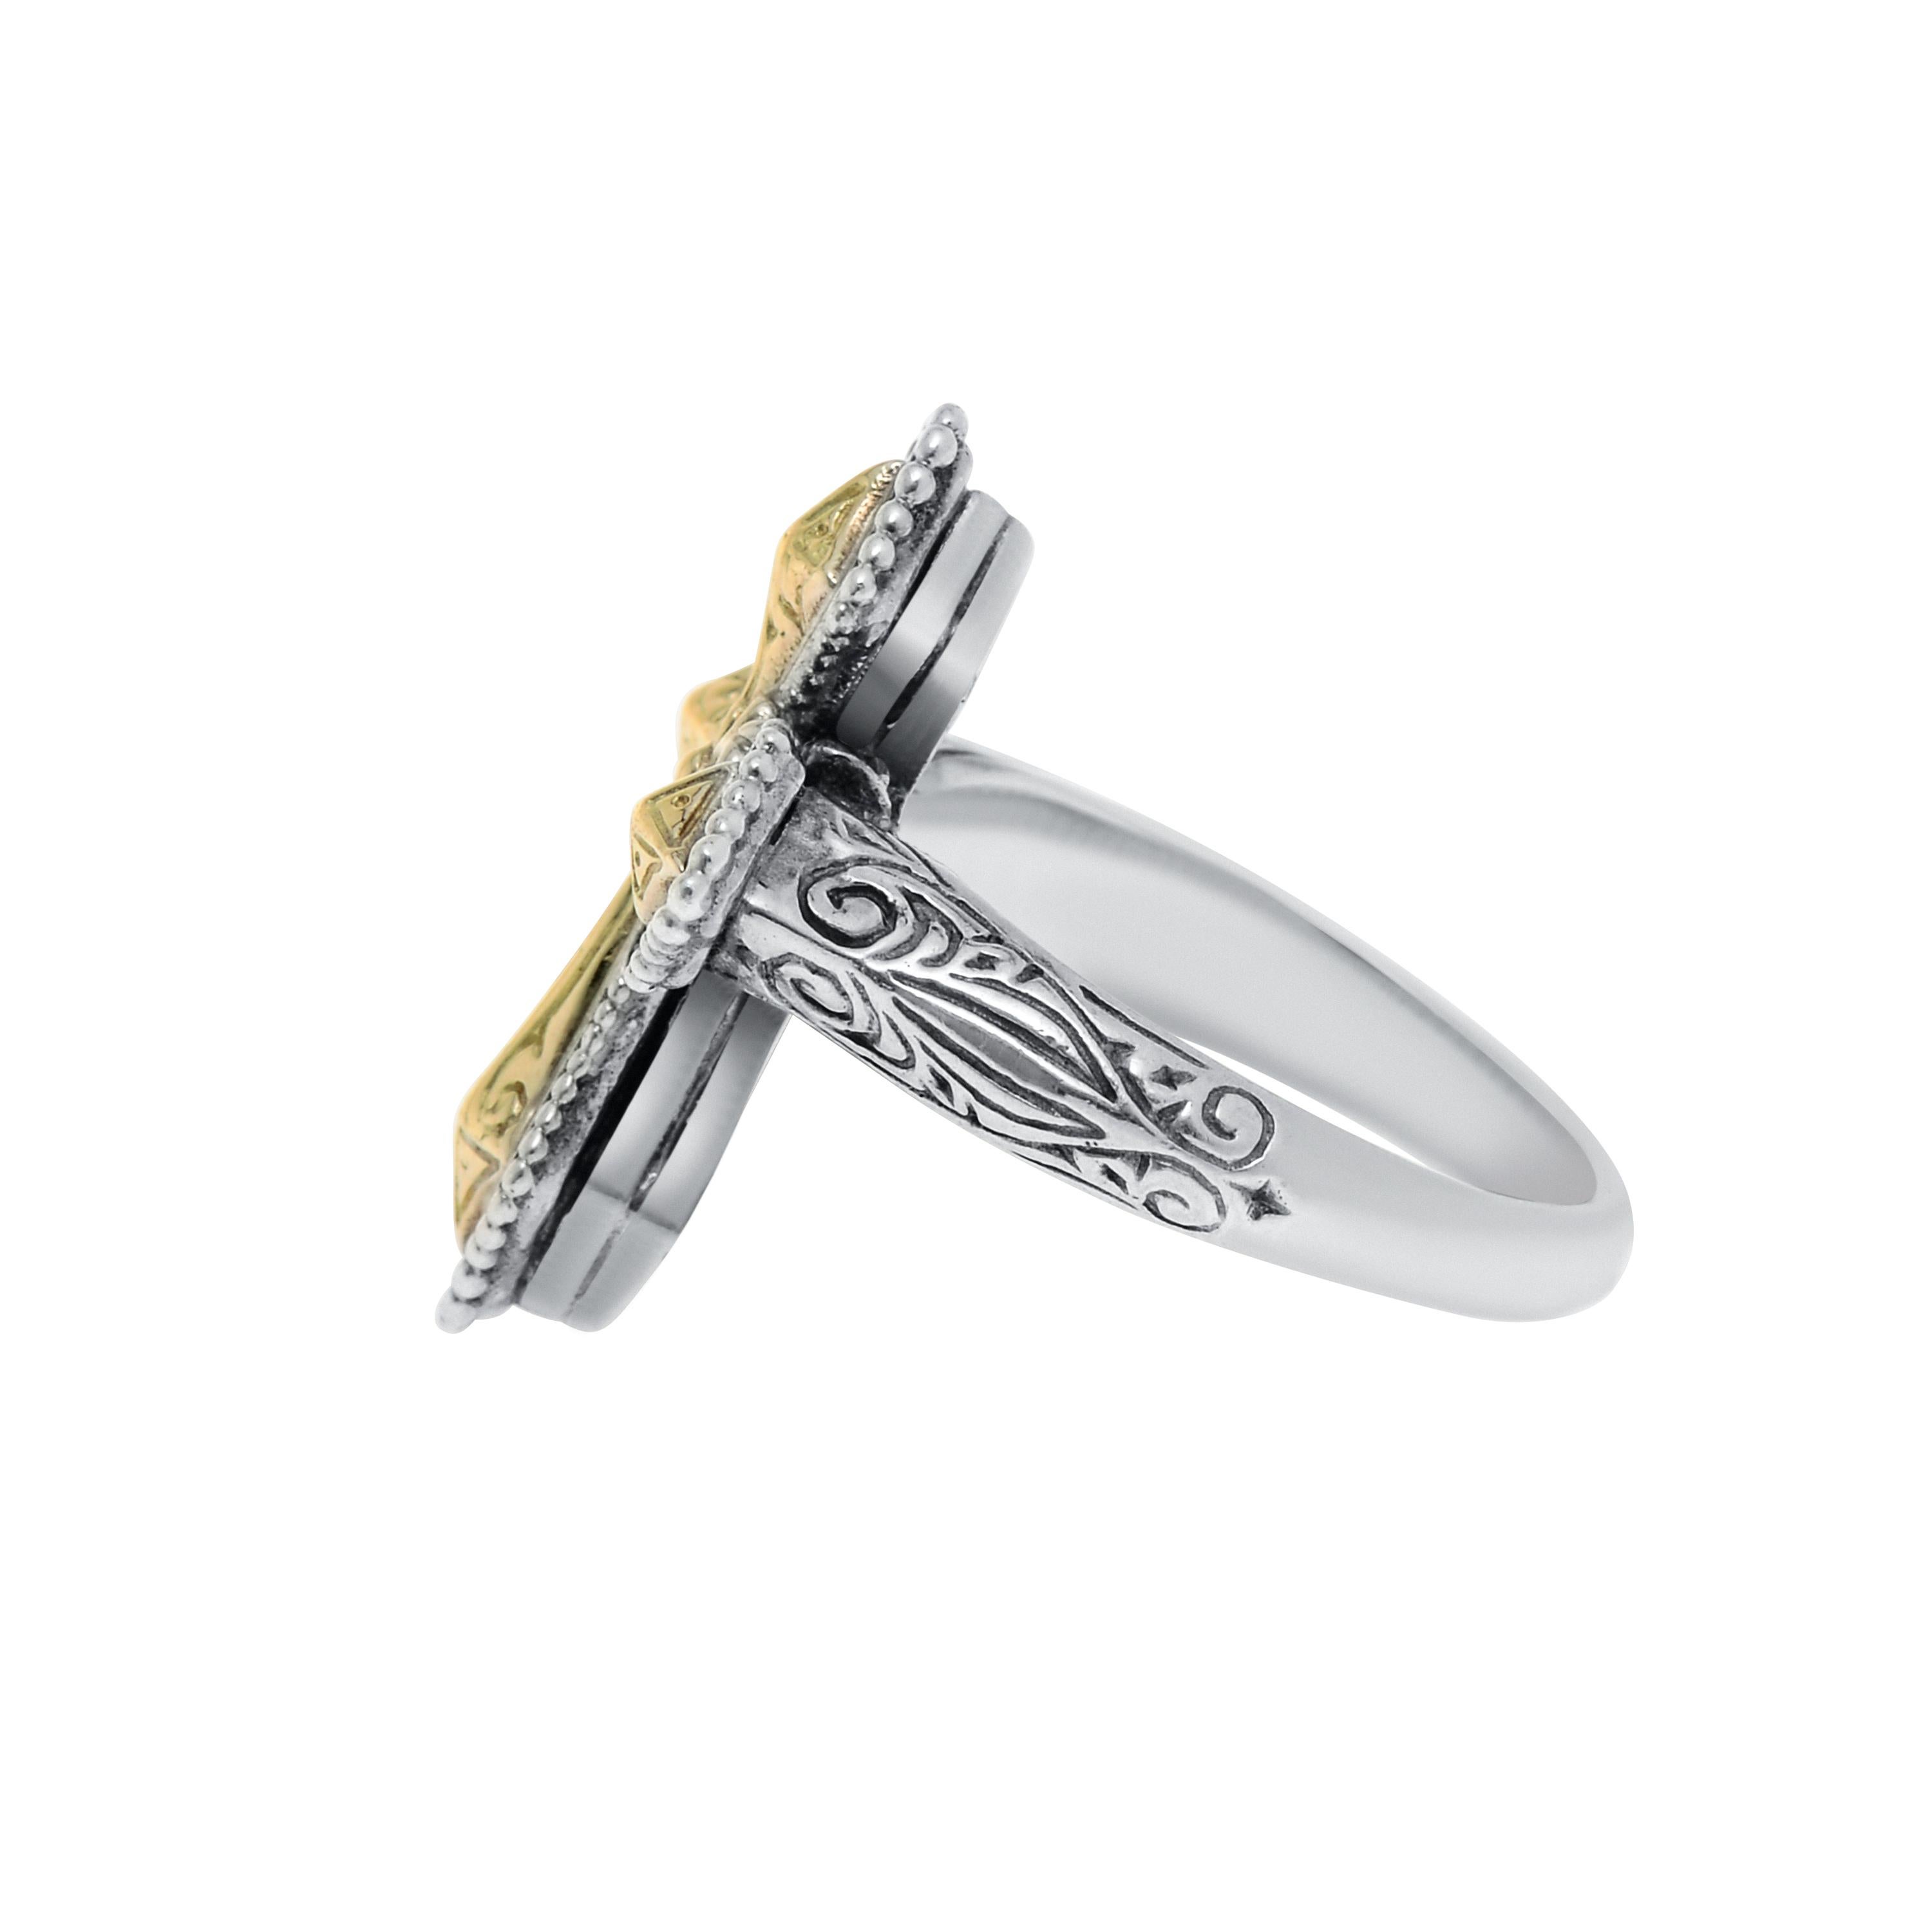 Contemporary Konstantino Kleos 18K Yellow Gold & Sterling Silver Cross Ring sz 7.25 For Sale